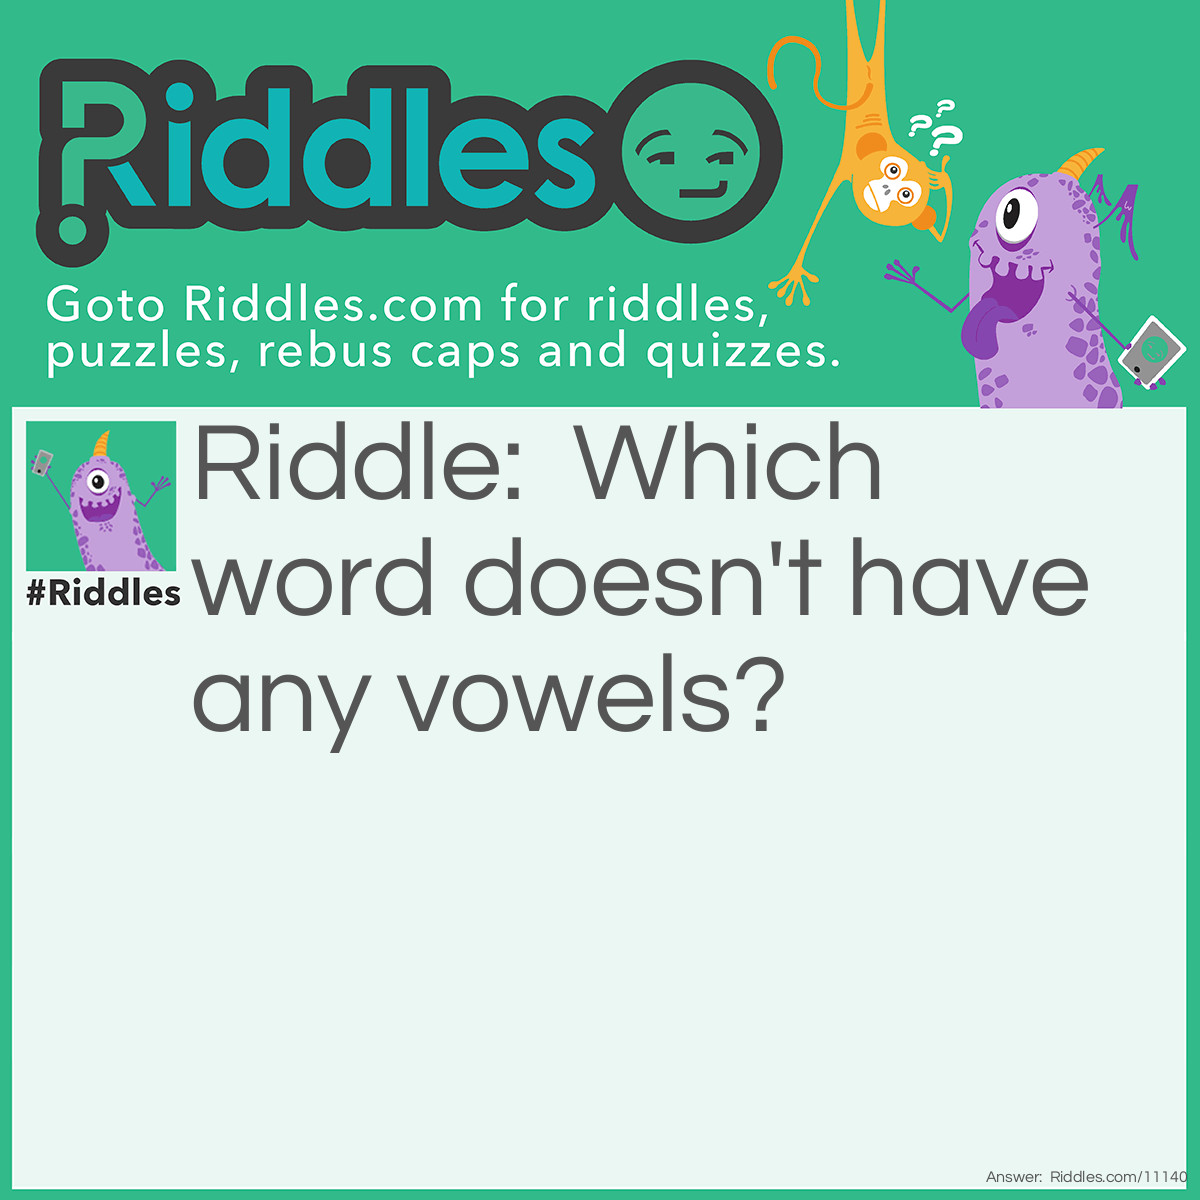 Riddle: Which word doesn't have any vowels? Answer: Try!